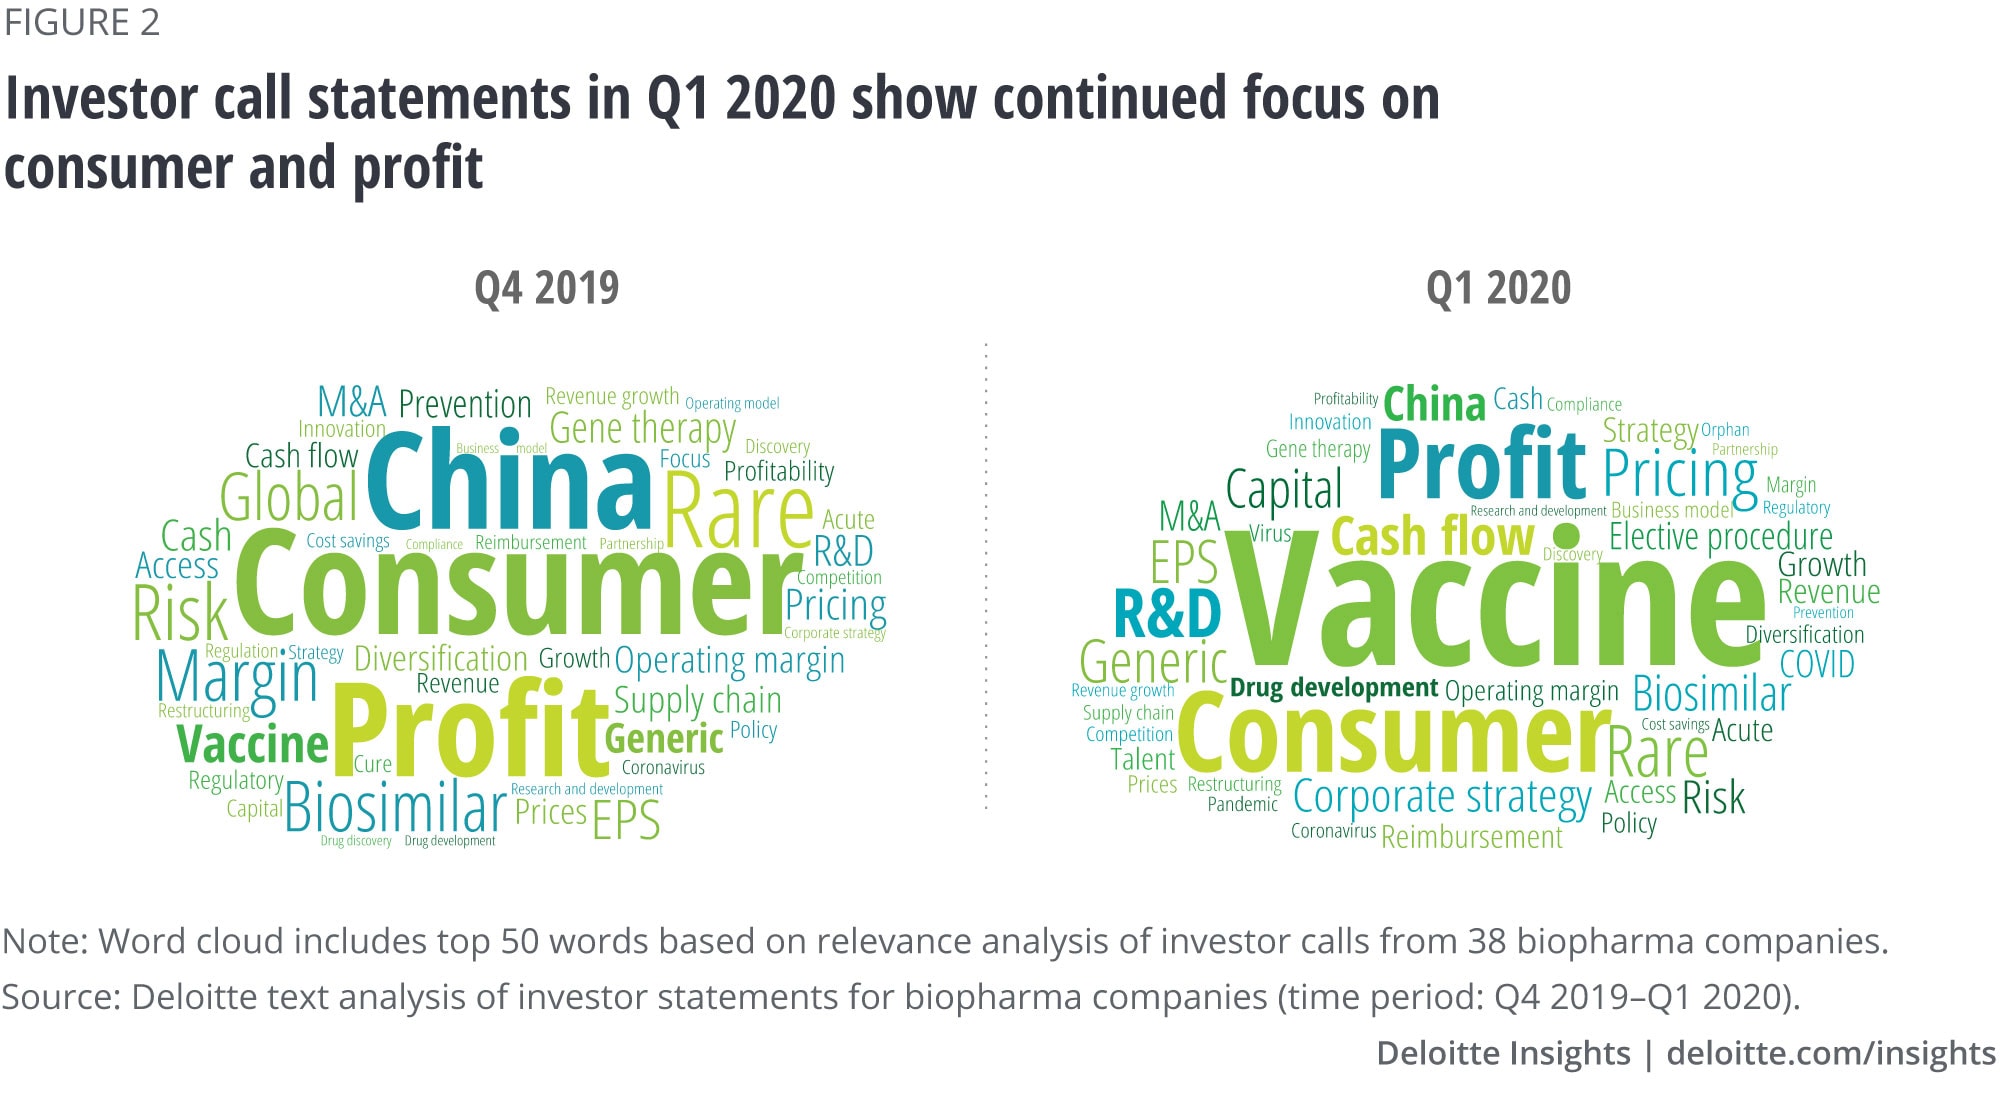 Investor call statements in Q1 2020 show continued focus on consumer and profit